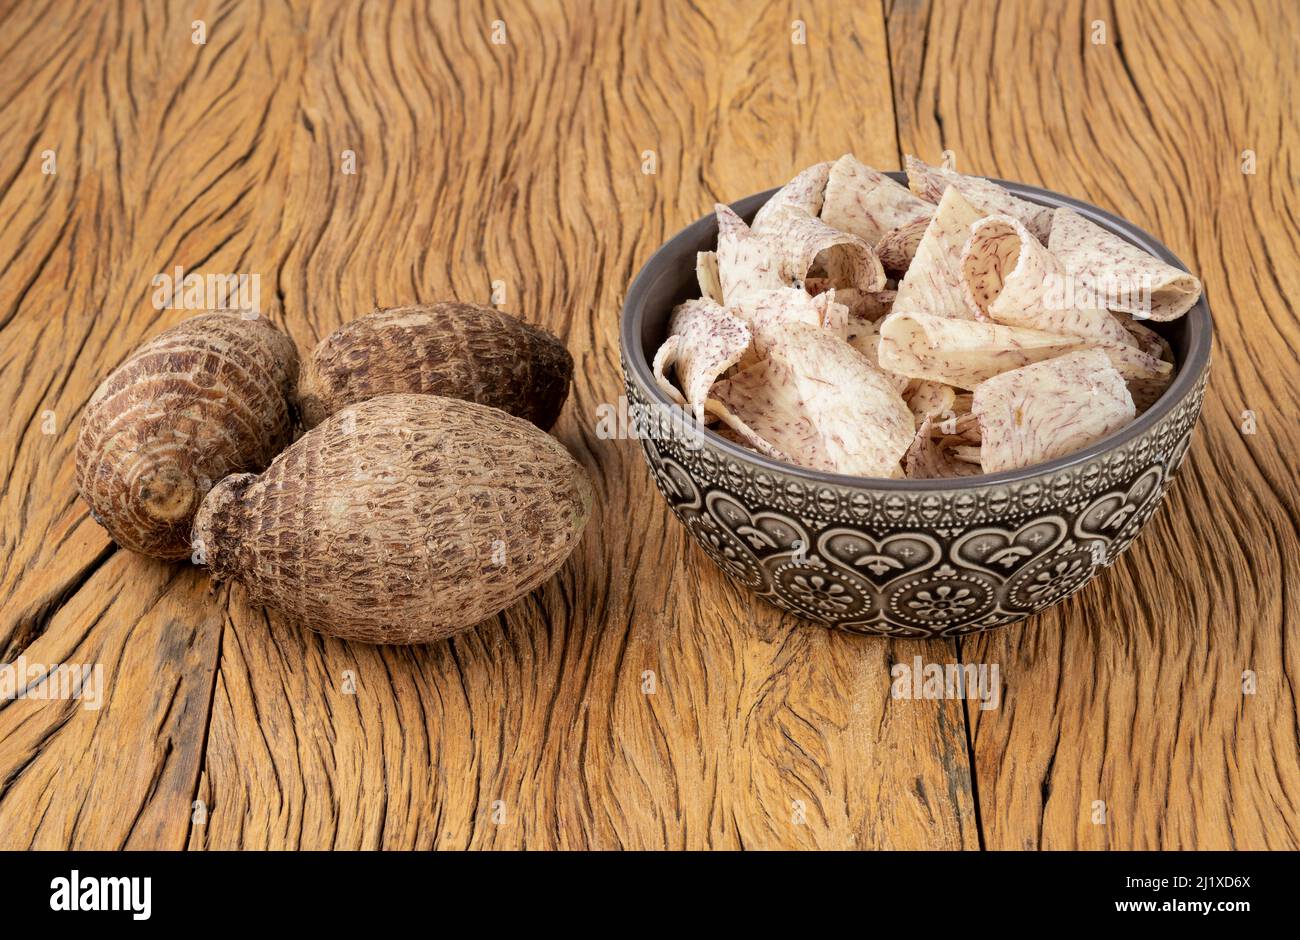 Yam or taro chips in a bowl with raw vegetable over wooden table. Stock Photo